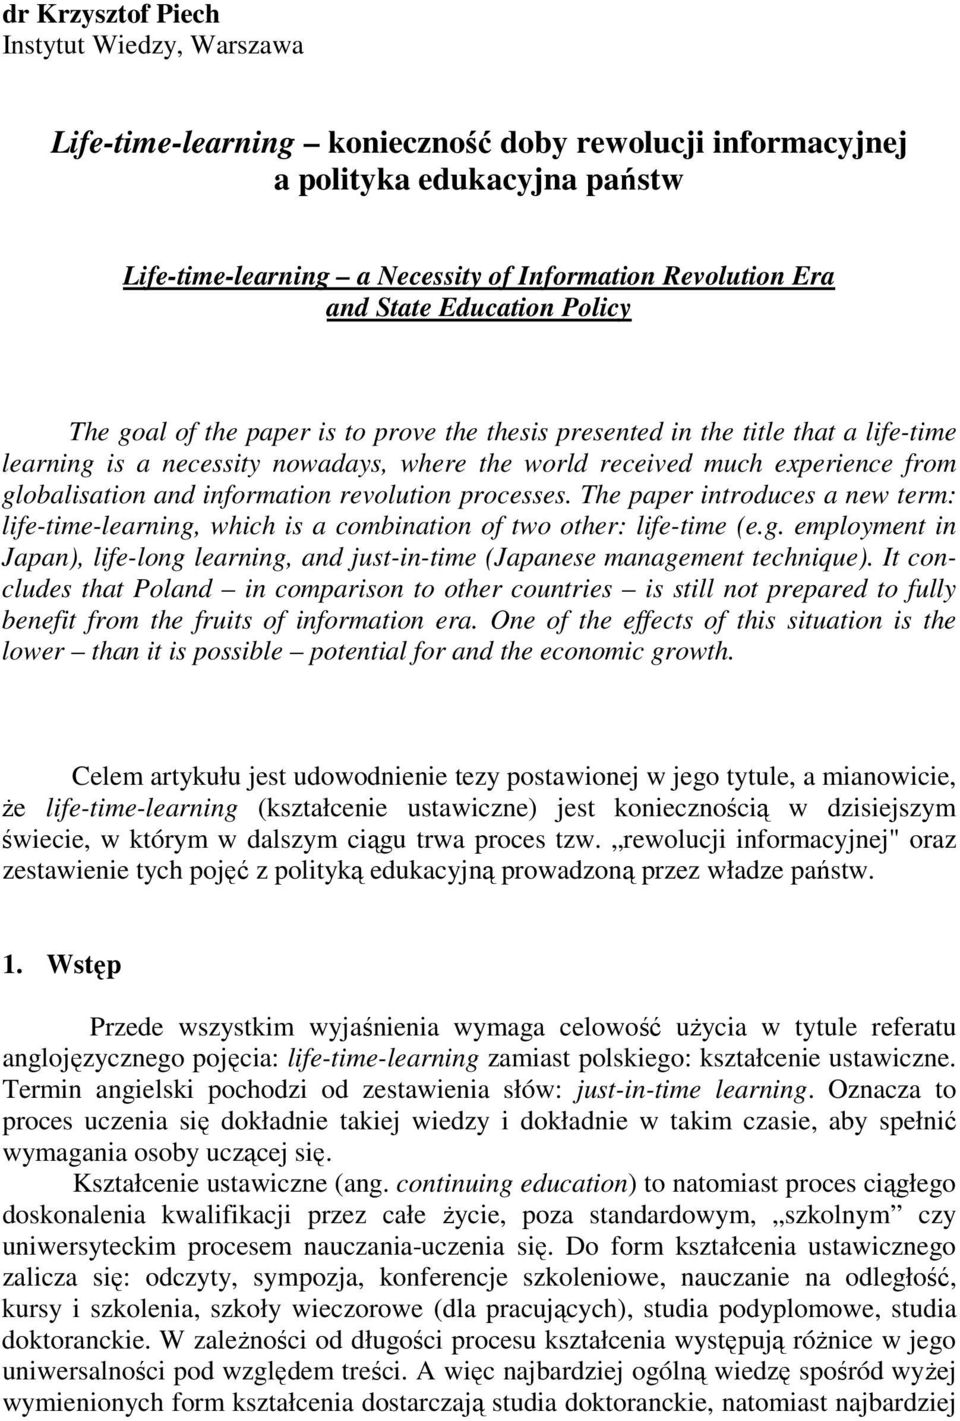 globalisation and information revolution processes. The paper introduces a new term: life-time-learning, which is a combination of two other: life-time (e.g. employment in Japan), life-long learning, and just-in-time (Japanese management technique).